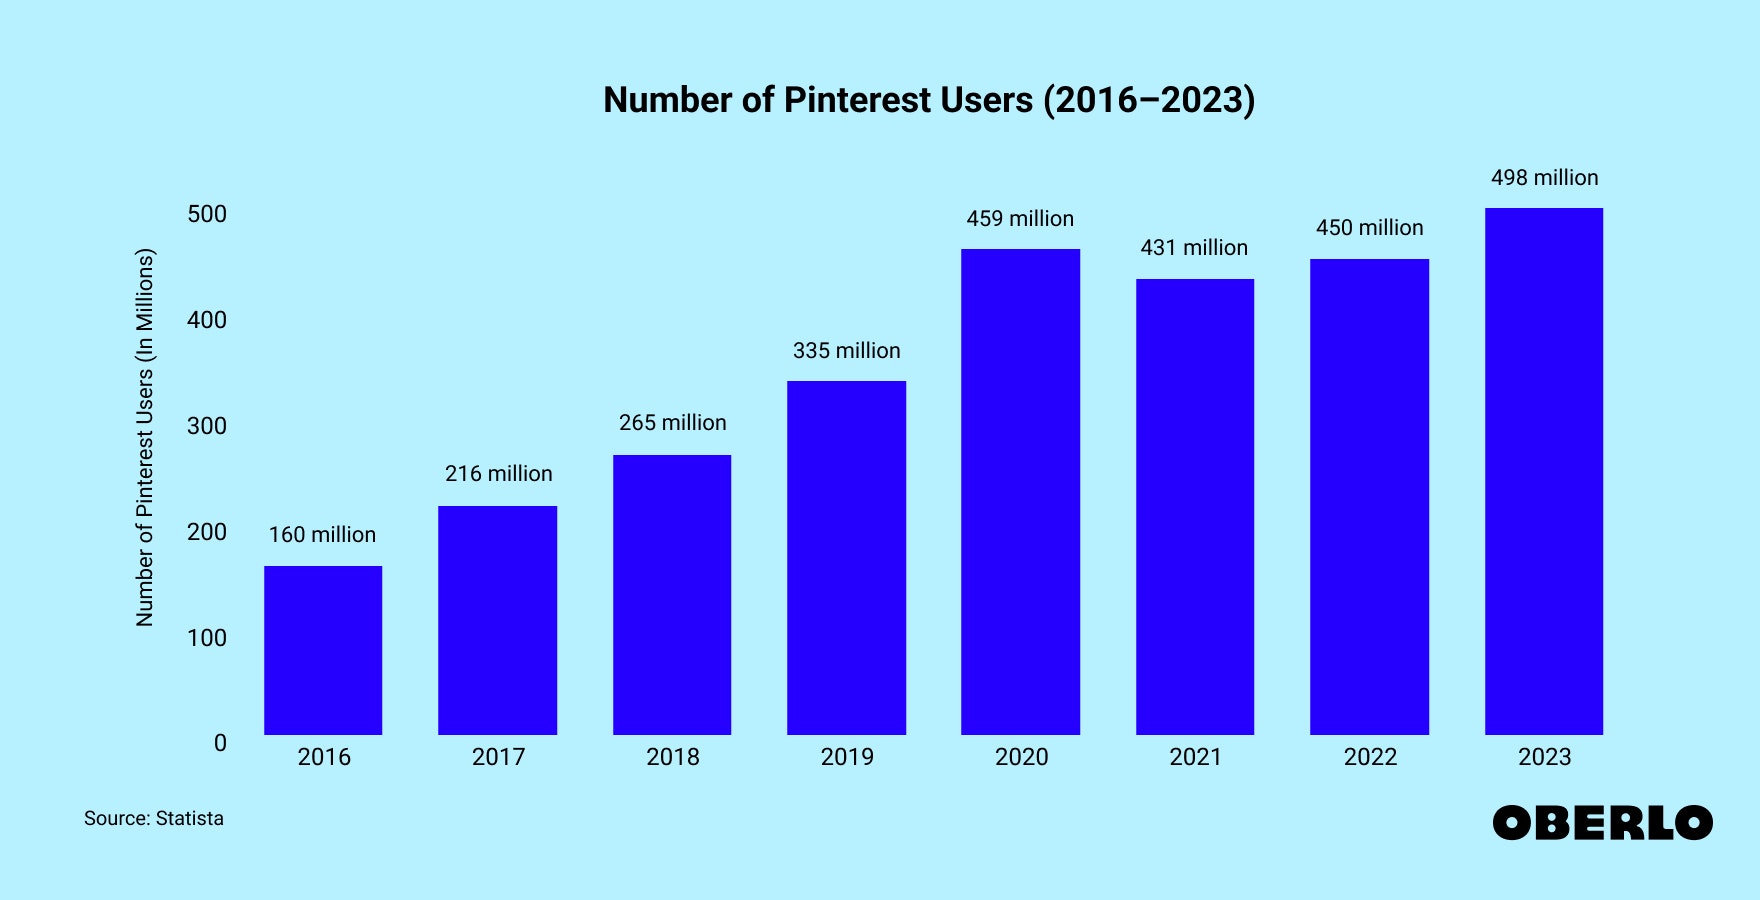 Chart showing the number of Pinterest users by year